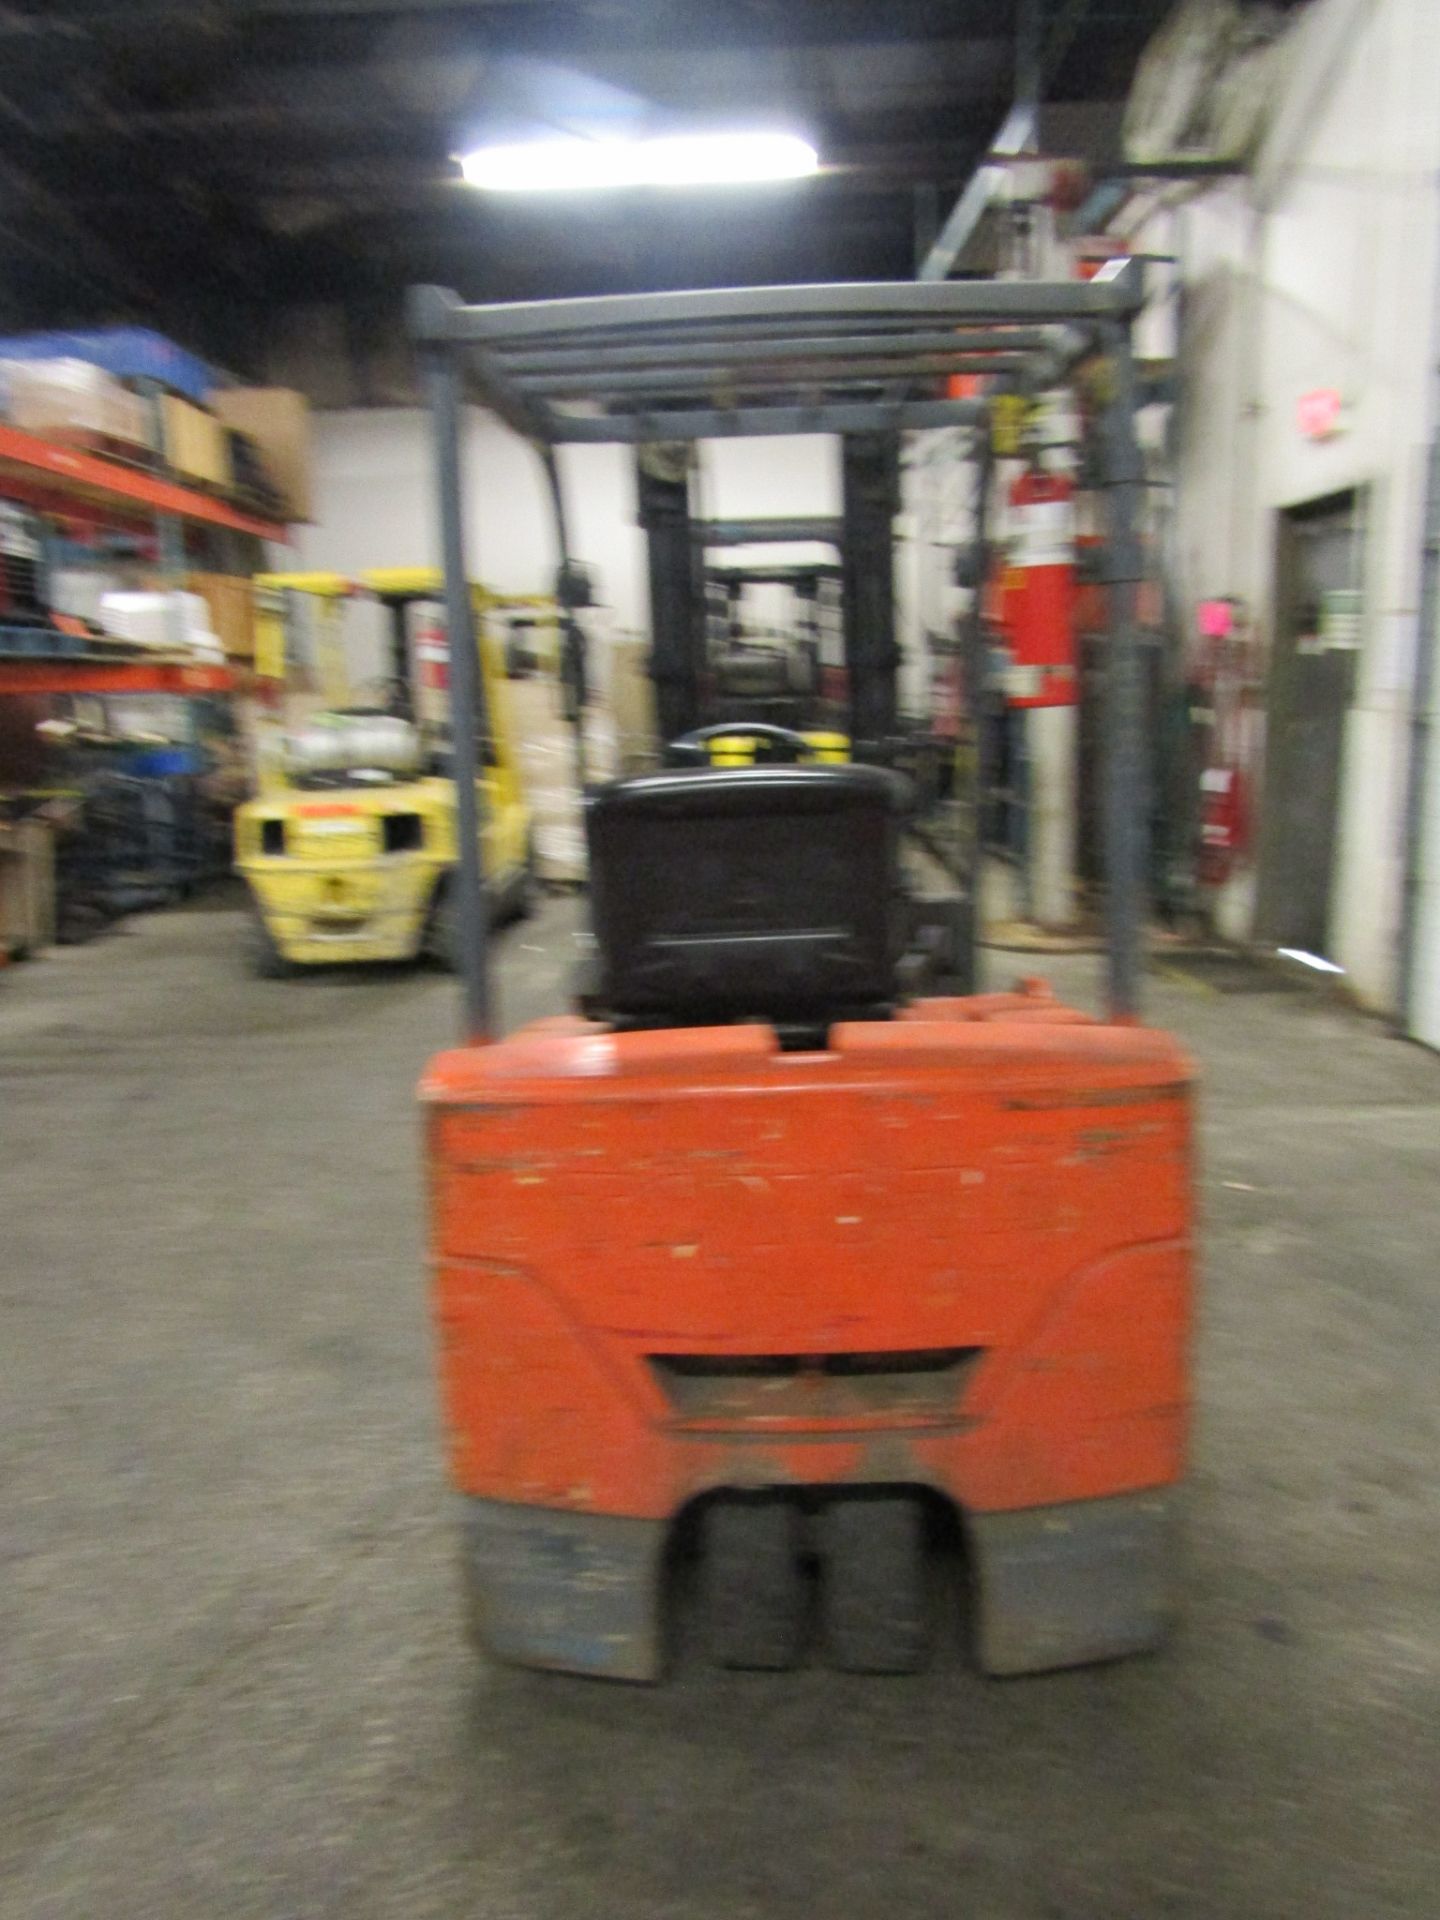 Toyota Electric Forklift 3500lbs capacity with 3-stage Mast with Sideshift, 3-wheel unit with - Image 2 of 3